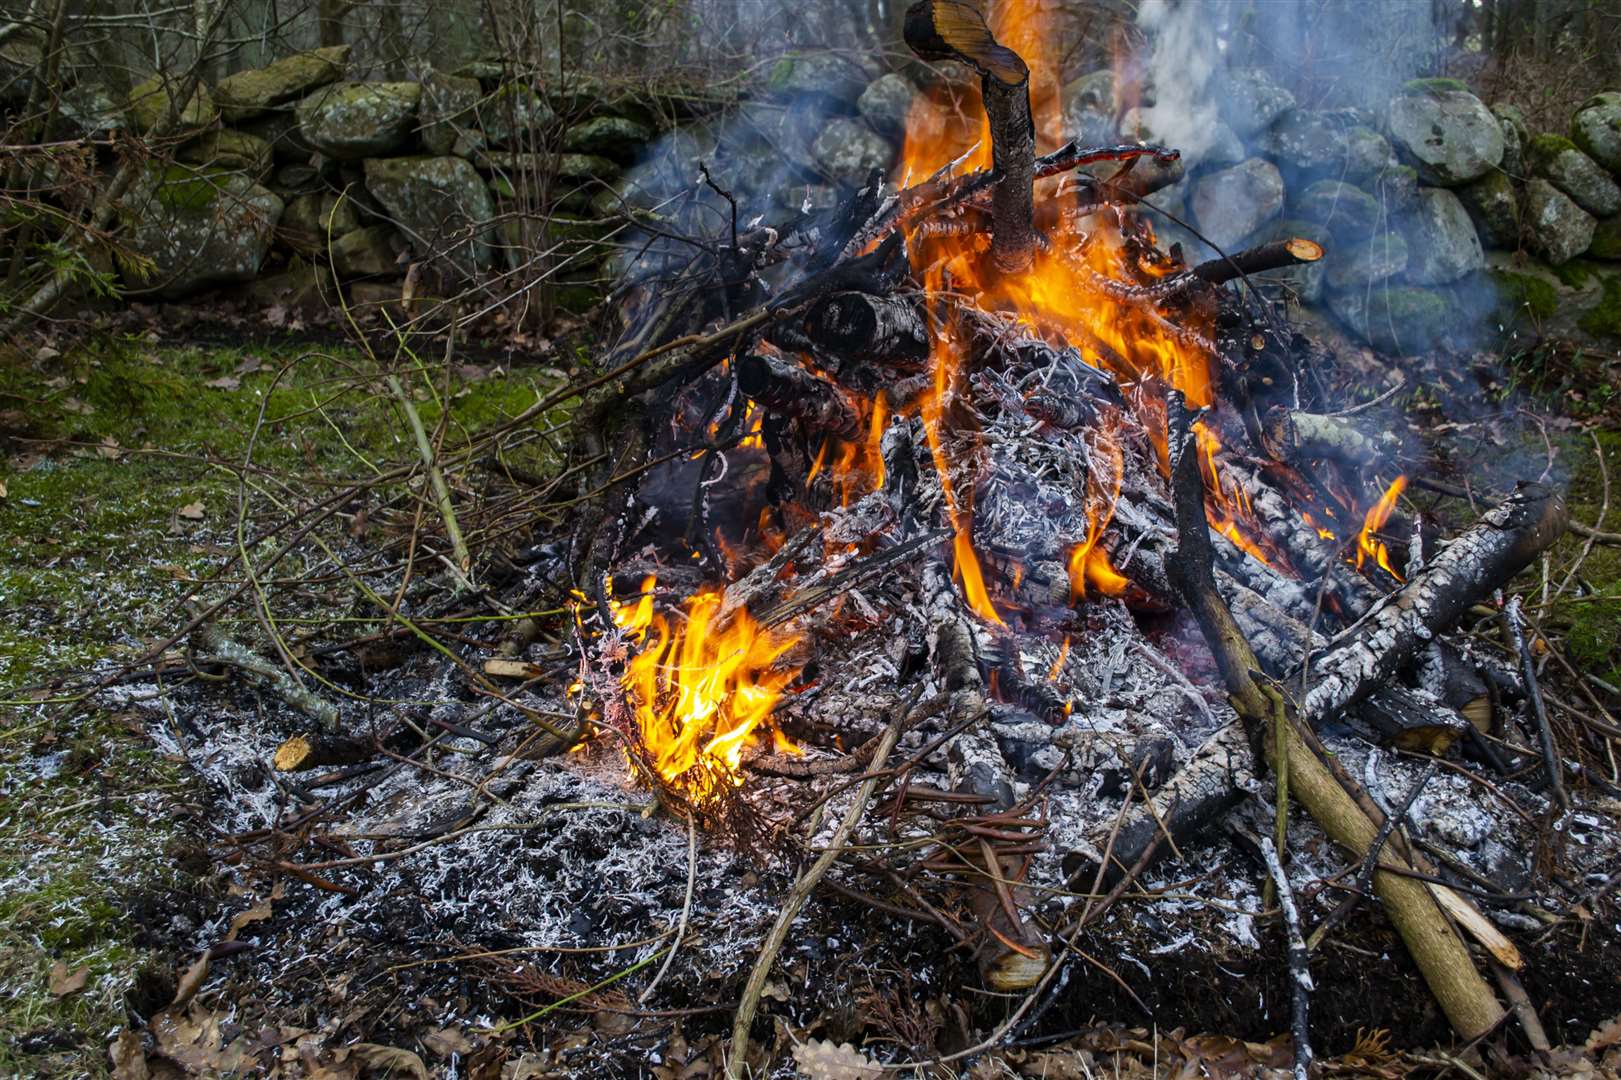 Always check below a bonfire before lighting it. Picture: iStock/PA